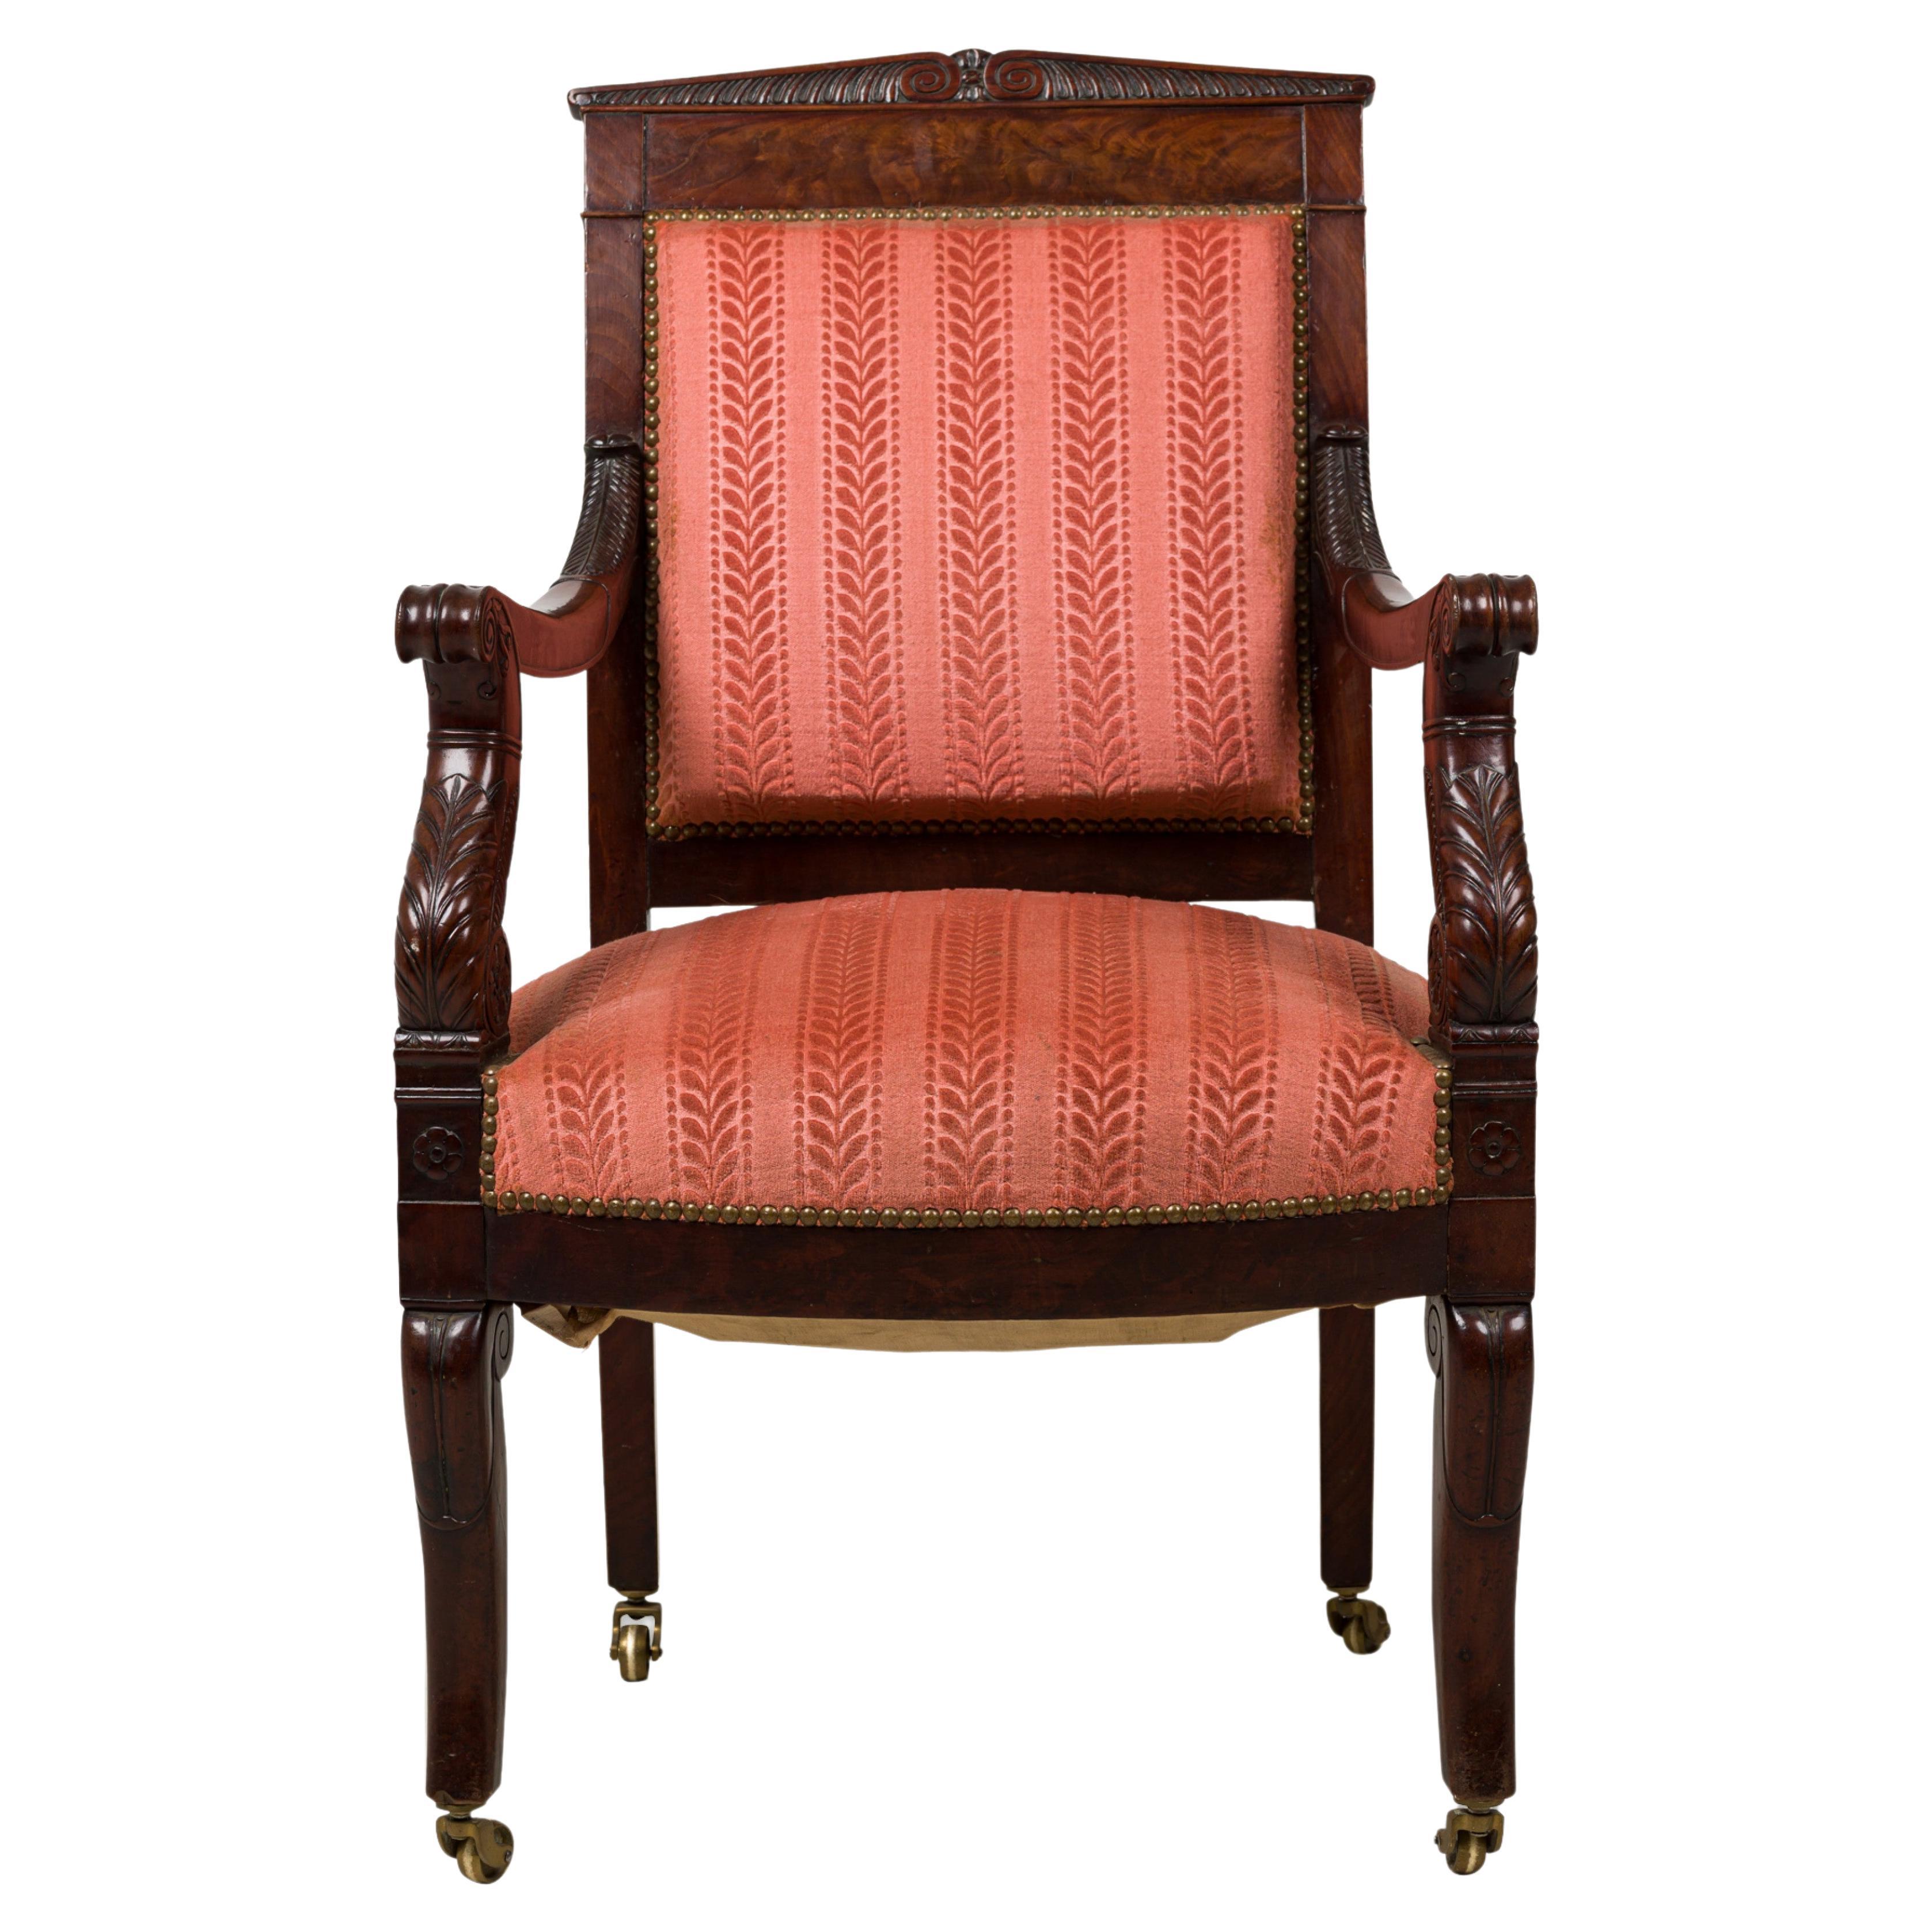 French Empire Armchair with Red Floral Striped Damask Upholstery For Sale